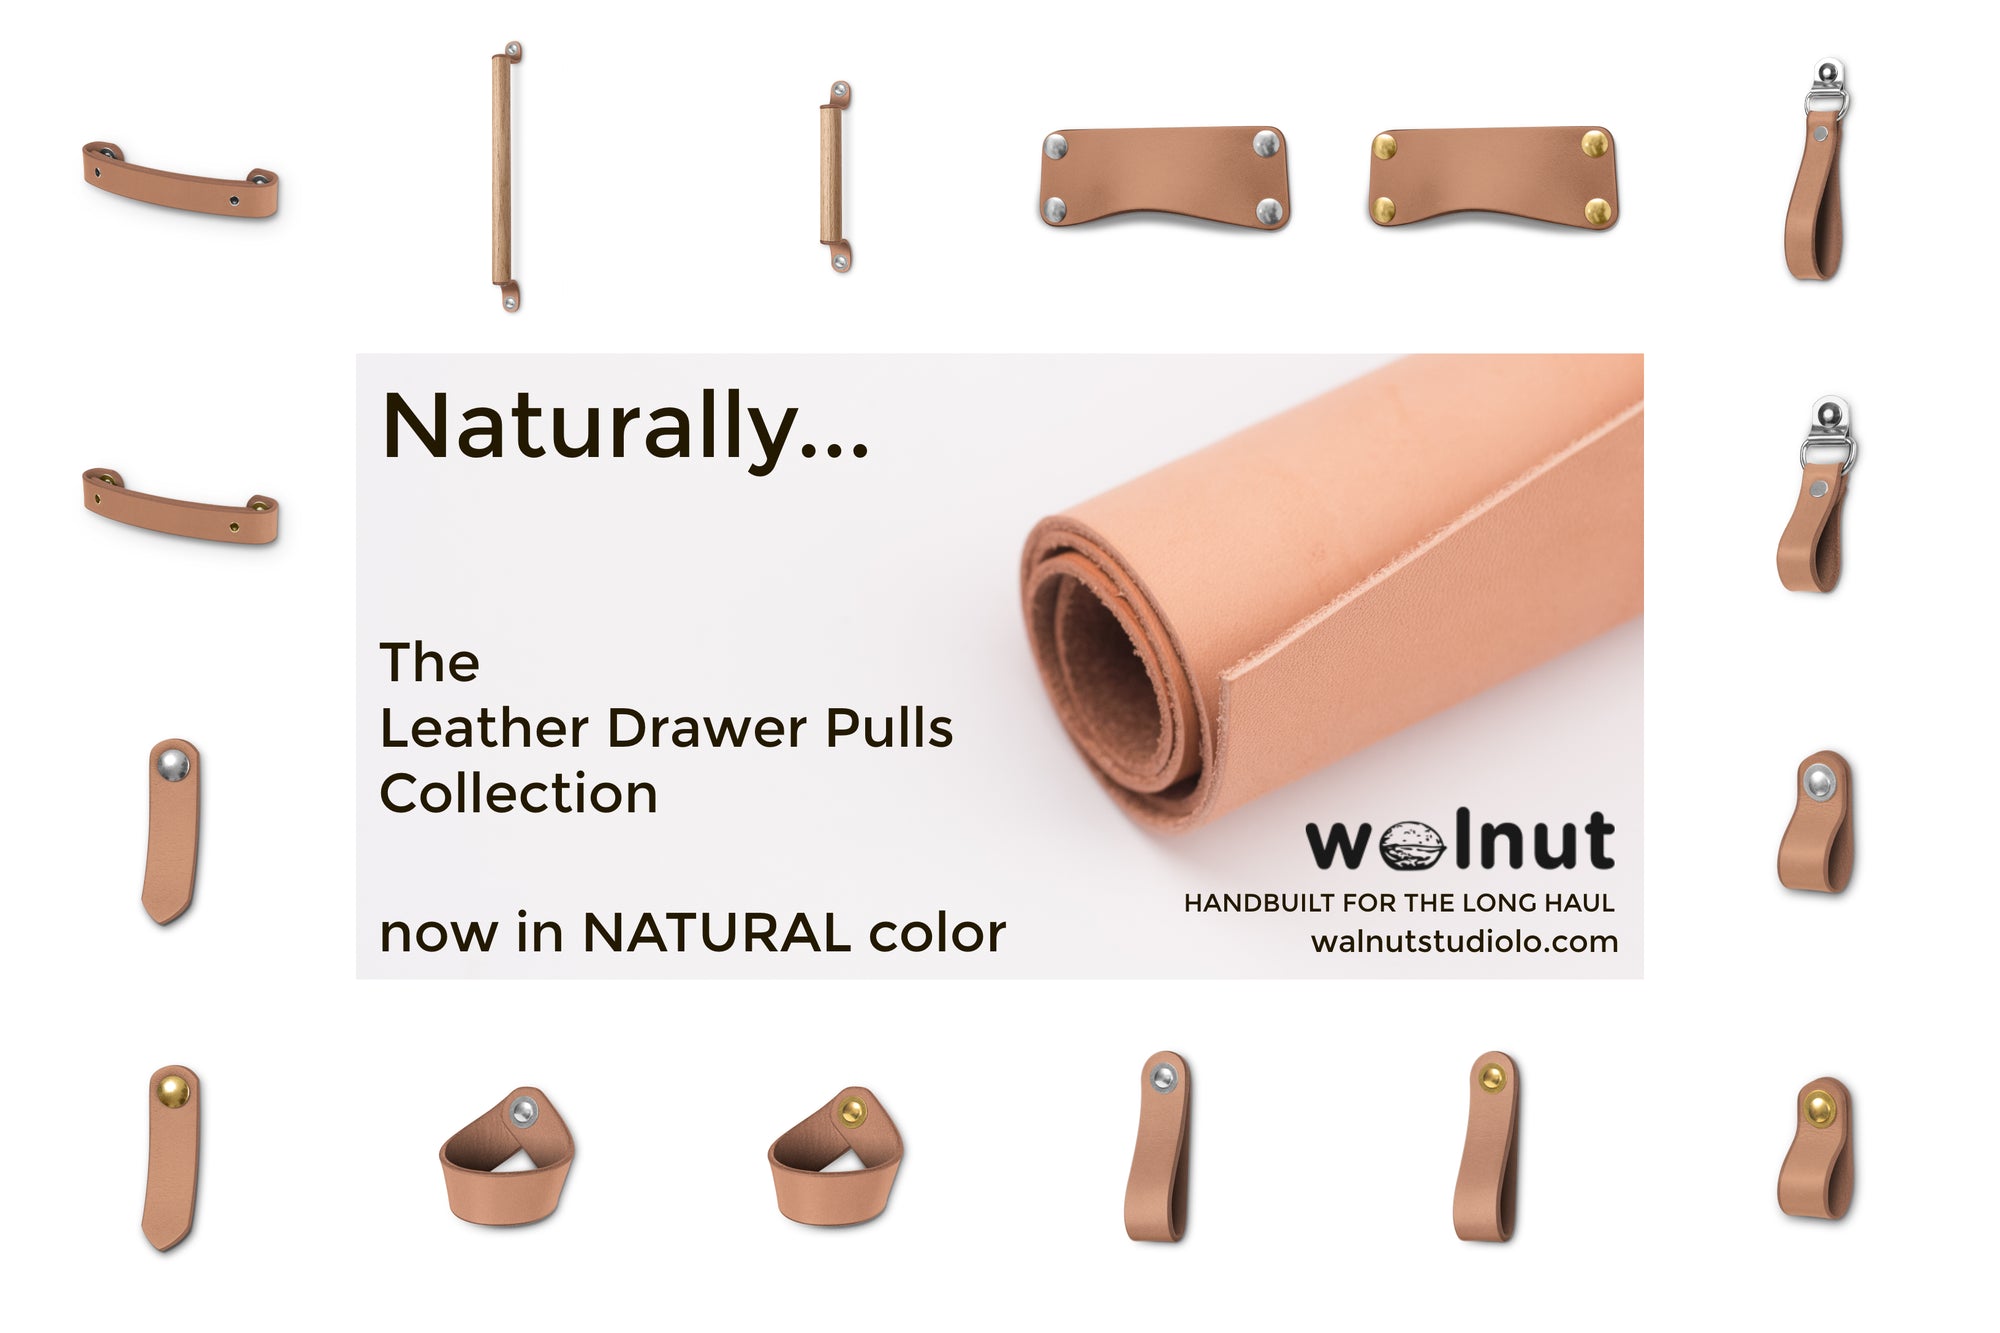 New color for the Drawer Pulls Collection: NATURAL